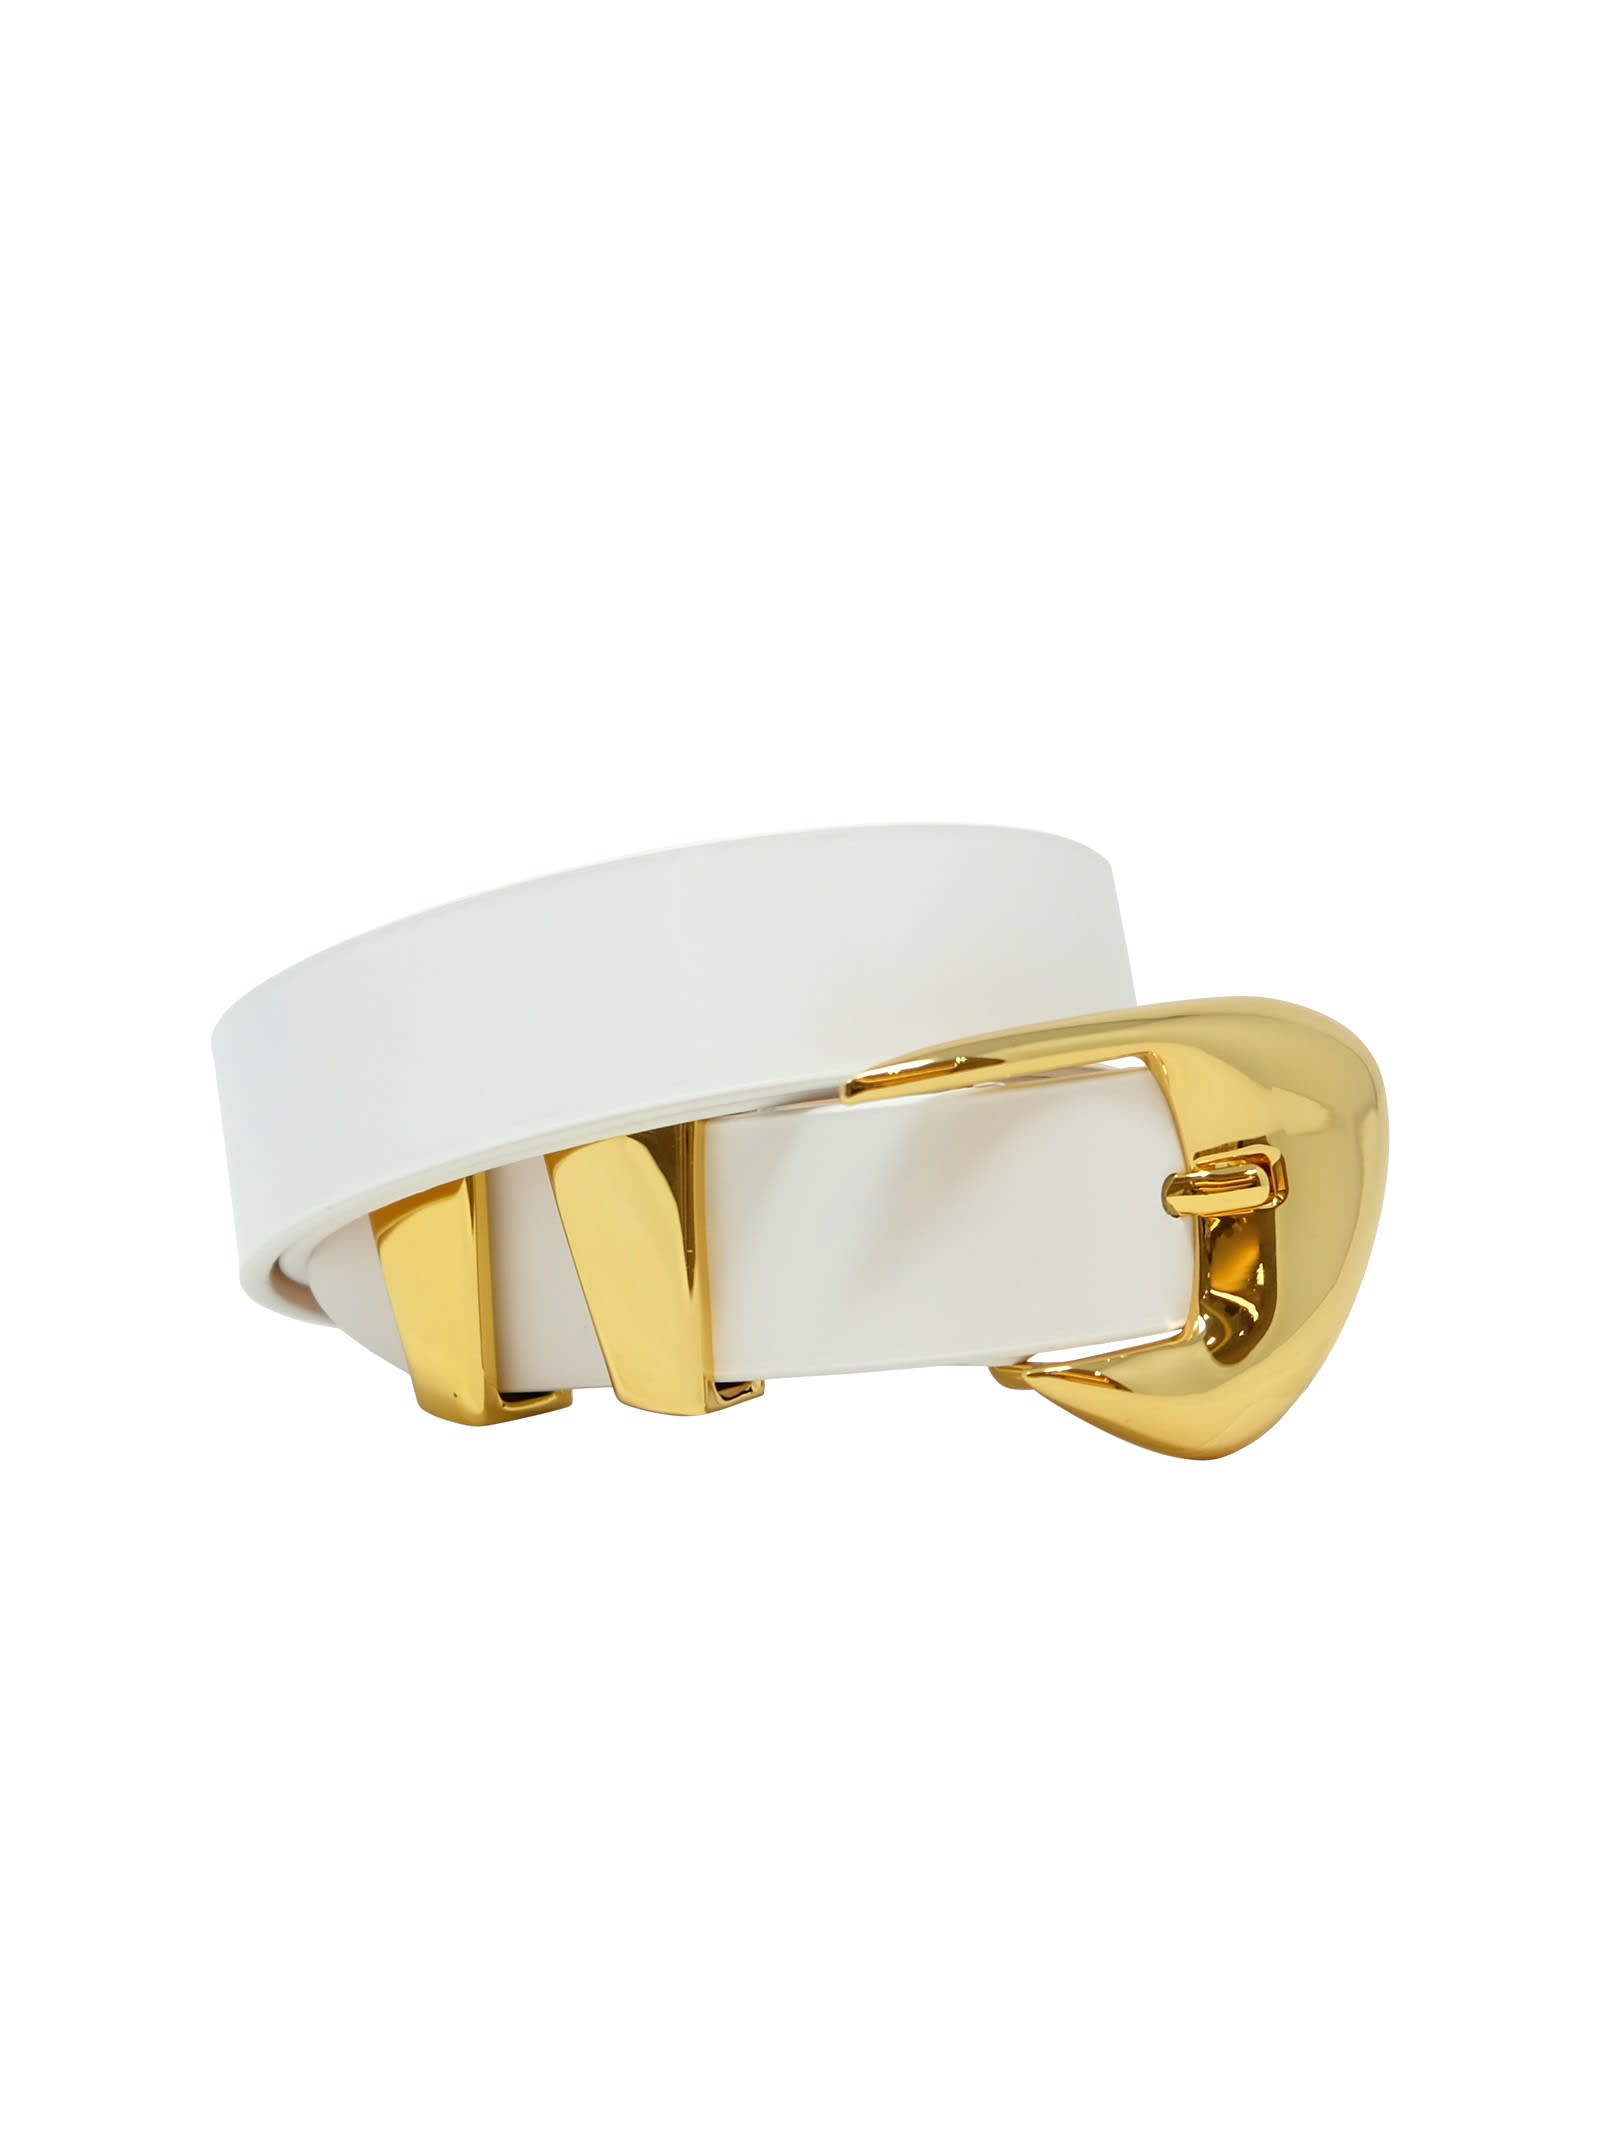 BY FAR BY FAR WHITE PATENT LEATHER MOORE BELT